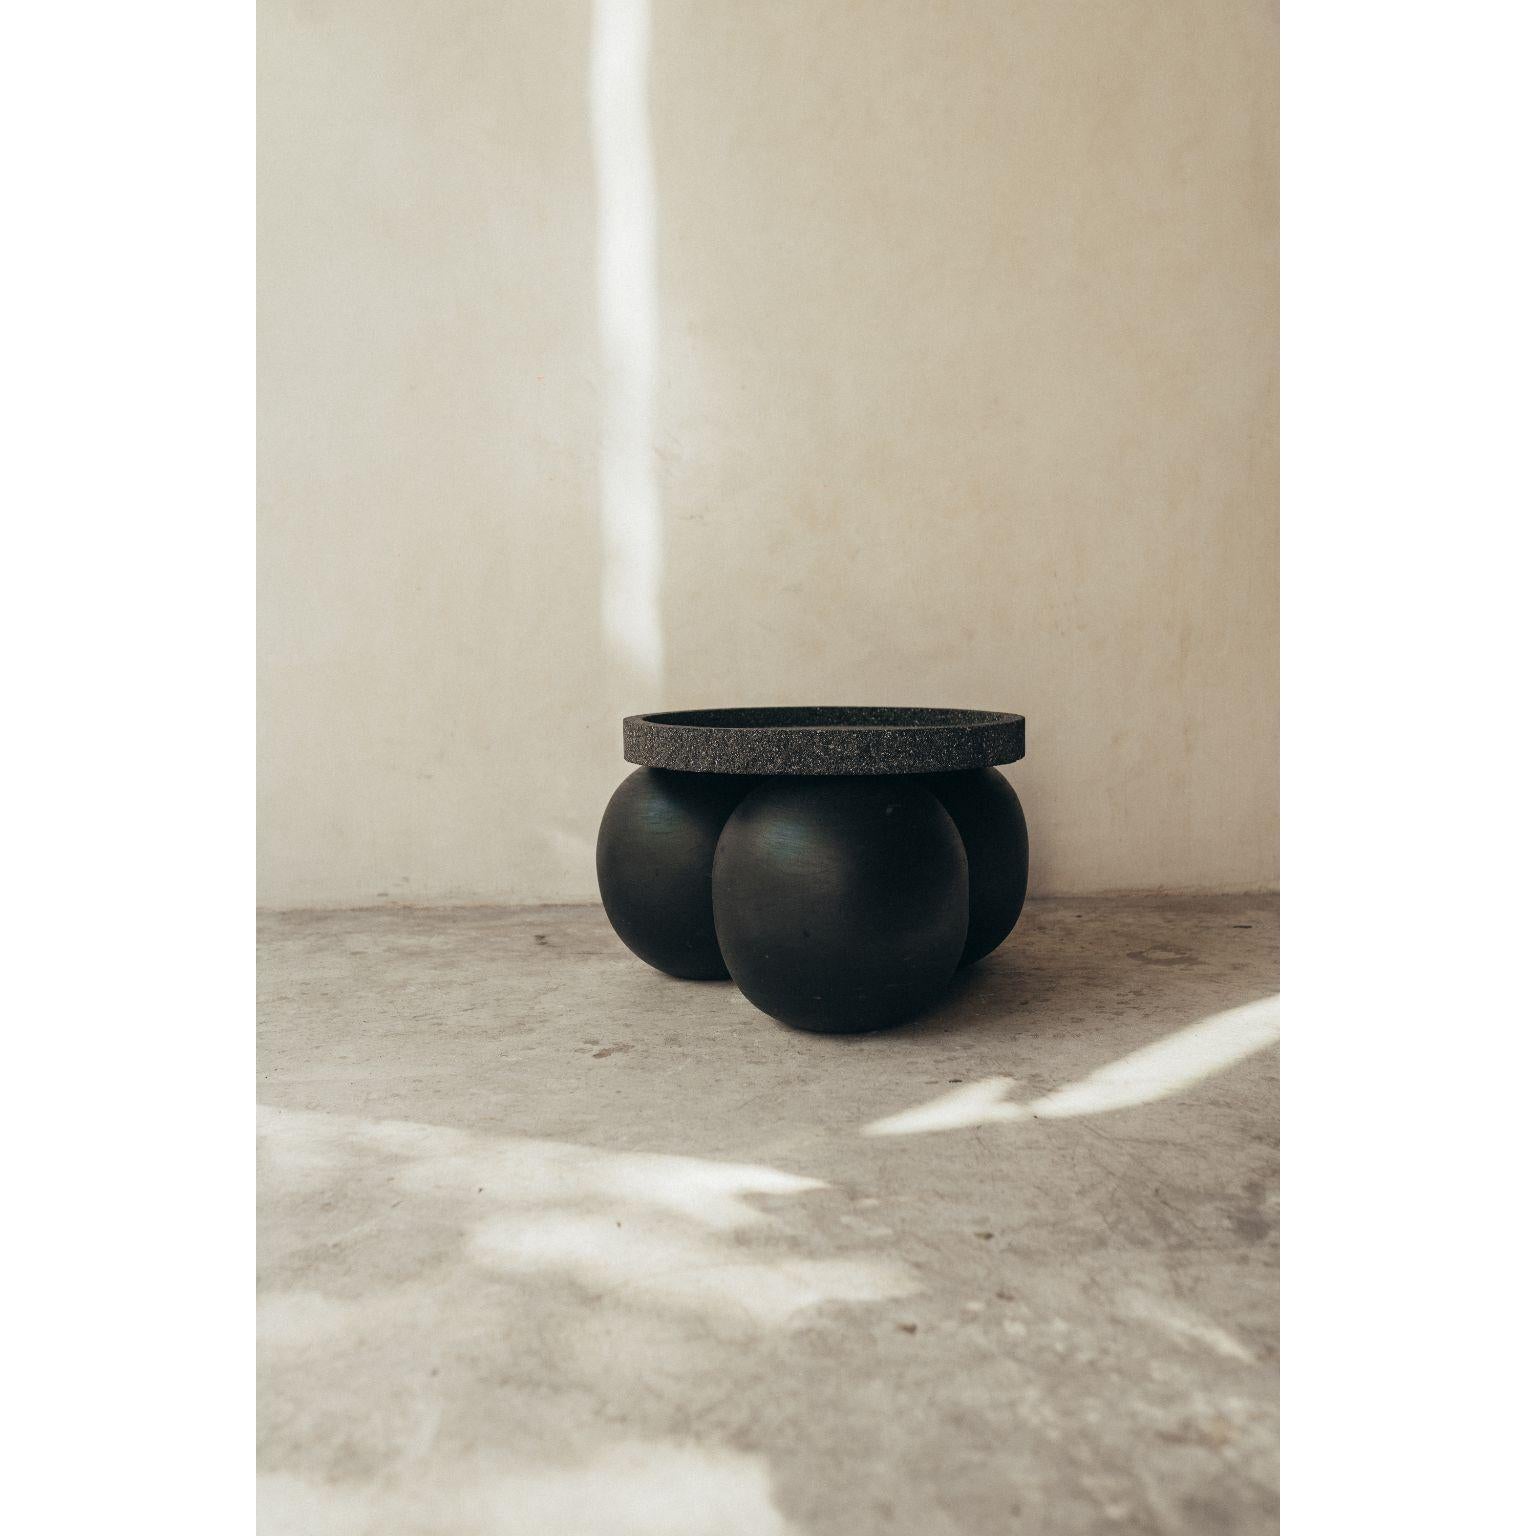 Black wooden balls table with volcanic stone cover by Daniel Orozco
Dimensions: D 20 x H 50 cm
Materials: wood, Volcanic Stone

Daniel Orozco Estudio
We are an inclusive interior design estudio, who love to work with fabrics and natural